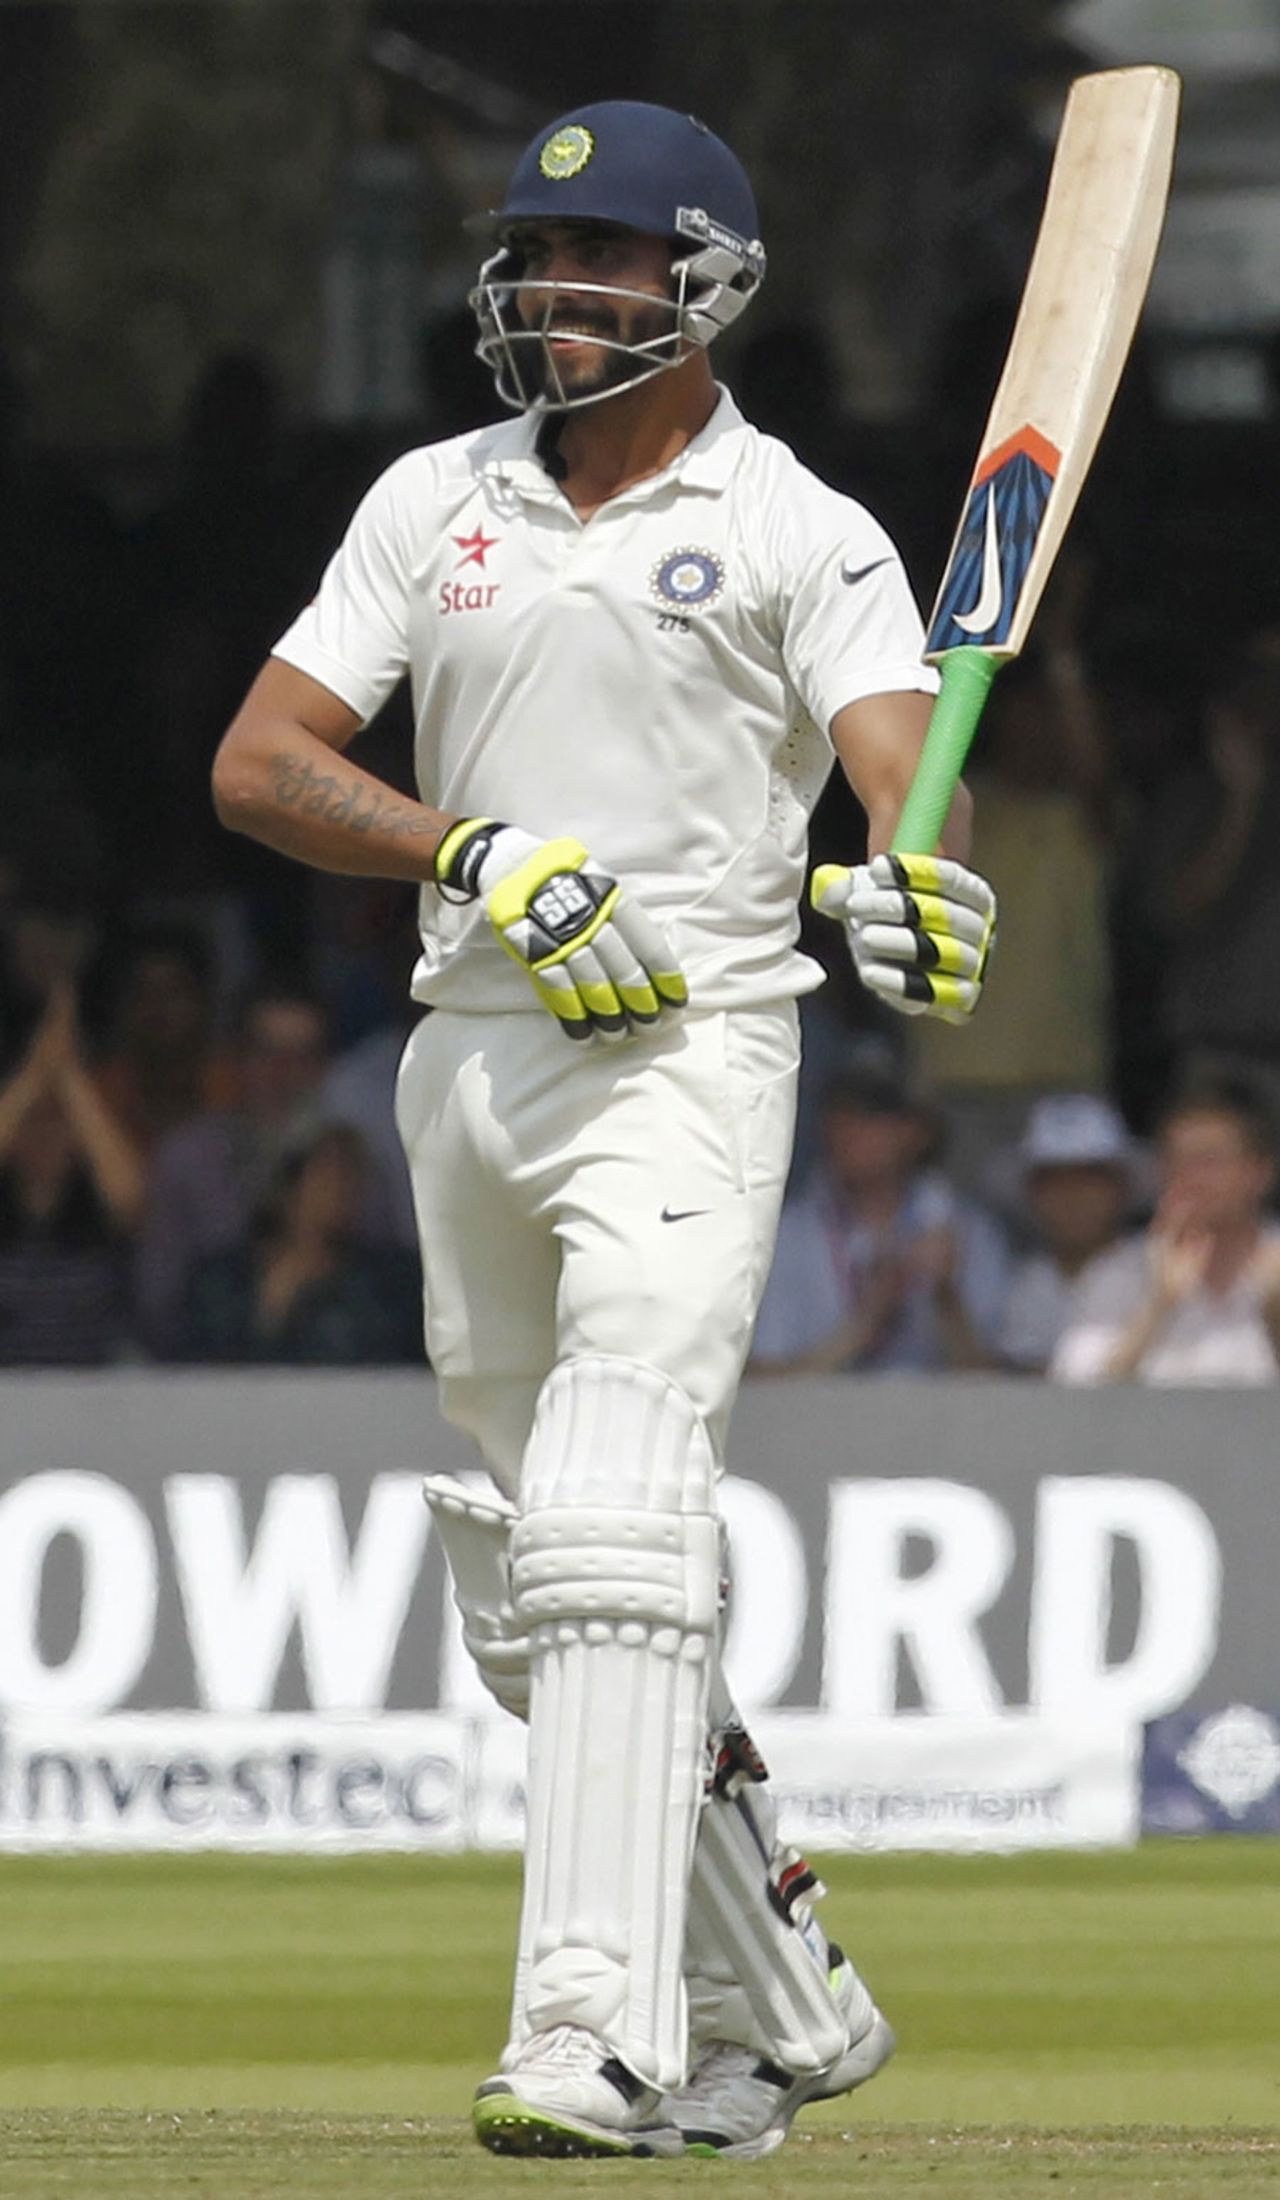 Ravindra Jadeja celebrated his maiden Test fifty in style, England v India, 2nd Investec Test, Lord's, 4th day, July 20, 2014